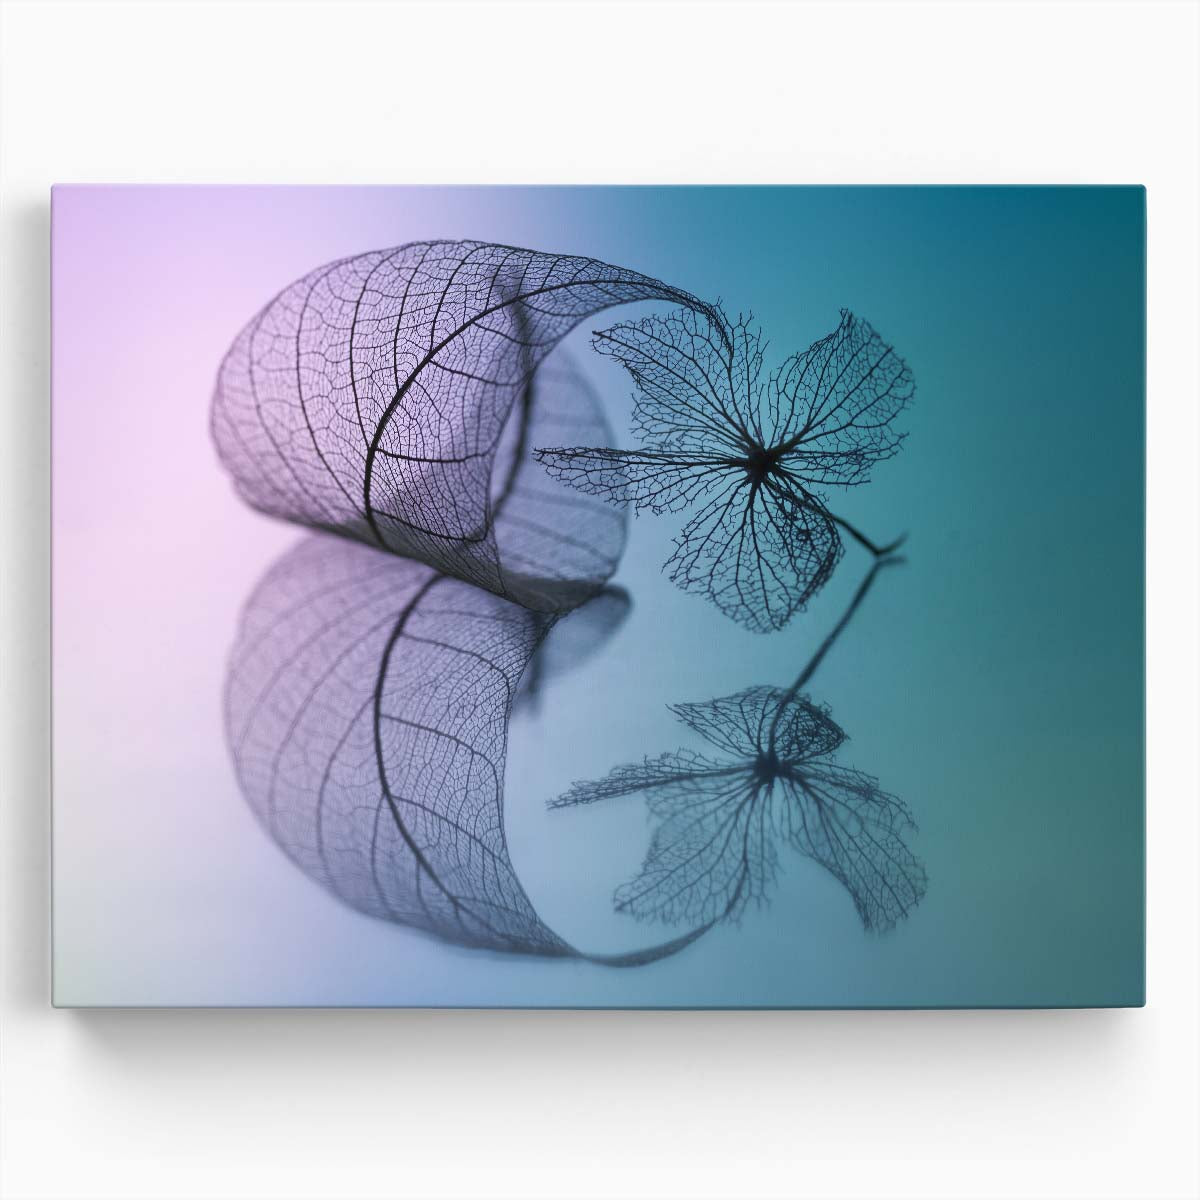 Vibrant Purple Floral Macro Minimalism Wall Art by Luxuriance Designs. Made in USA.